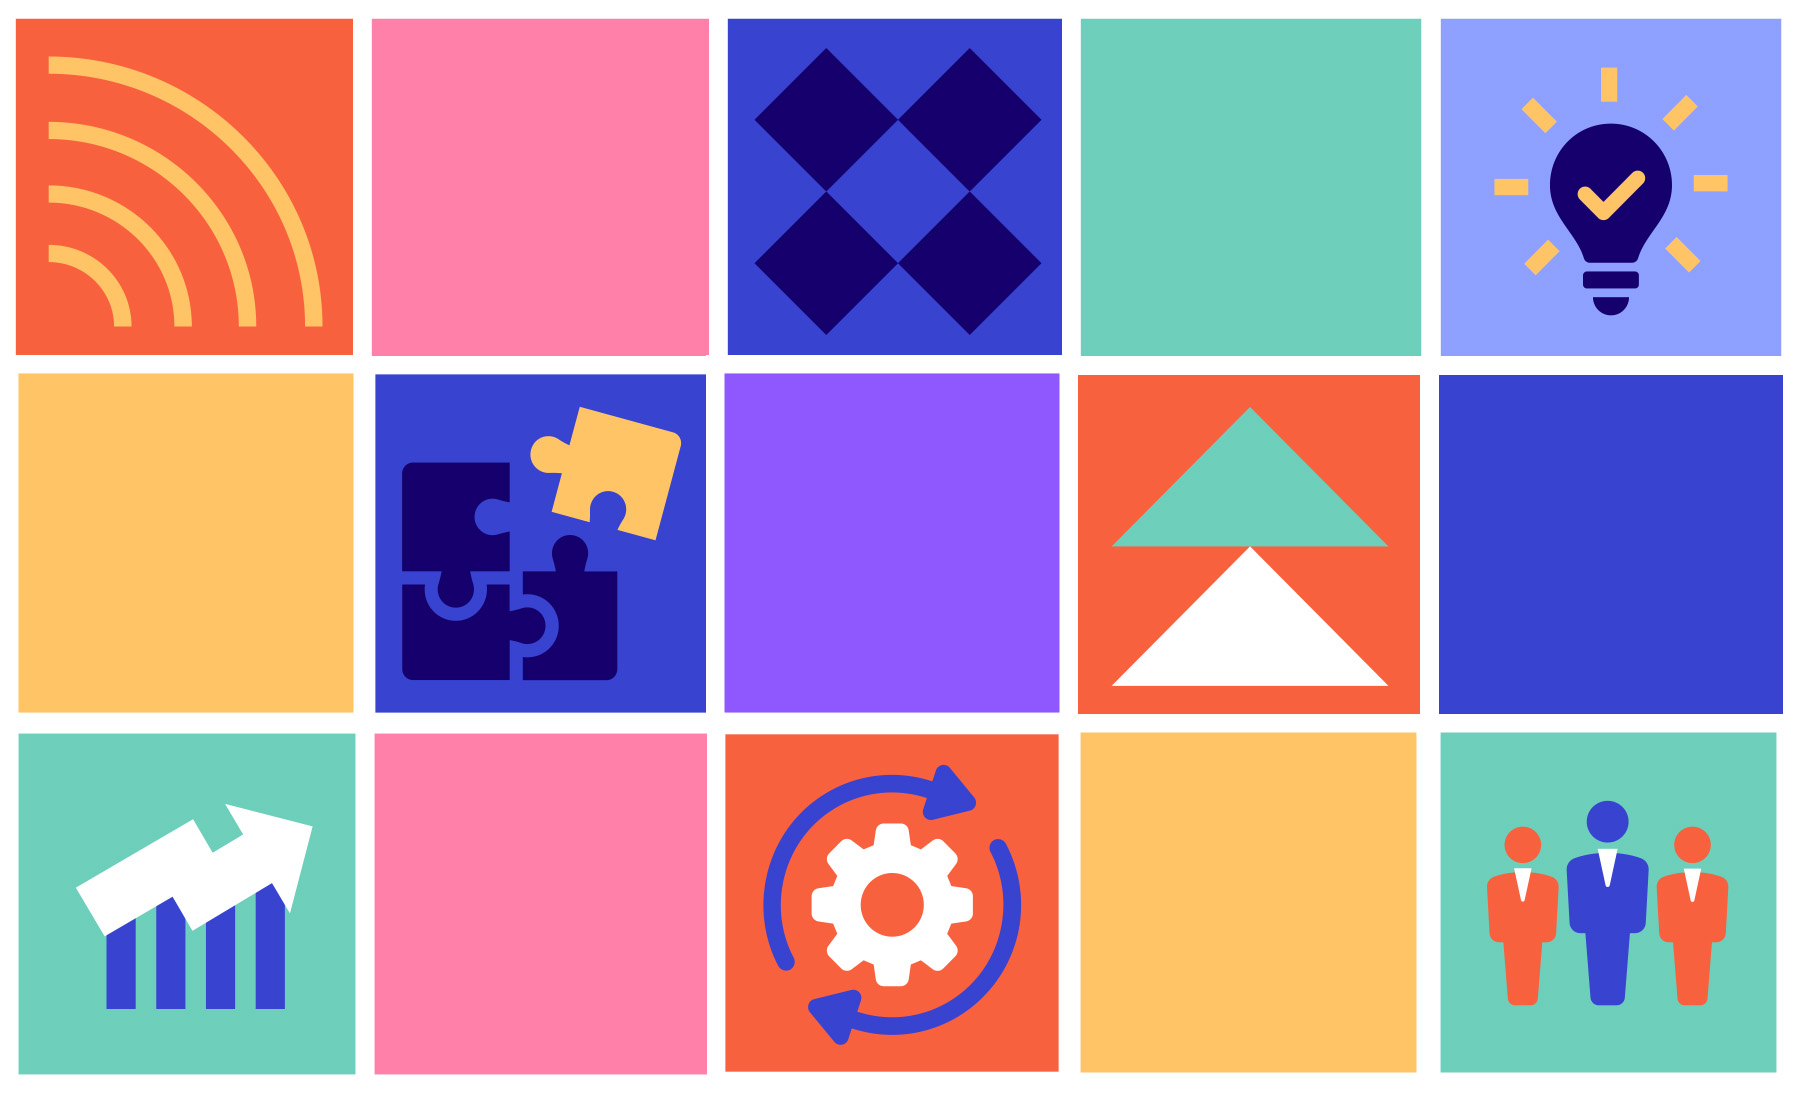 In a grid of boxes are multiple drawn images, such as puzzle pieces, arrows, a lightbulb, people, etc. 